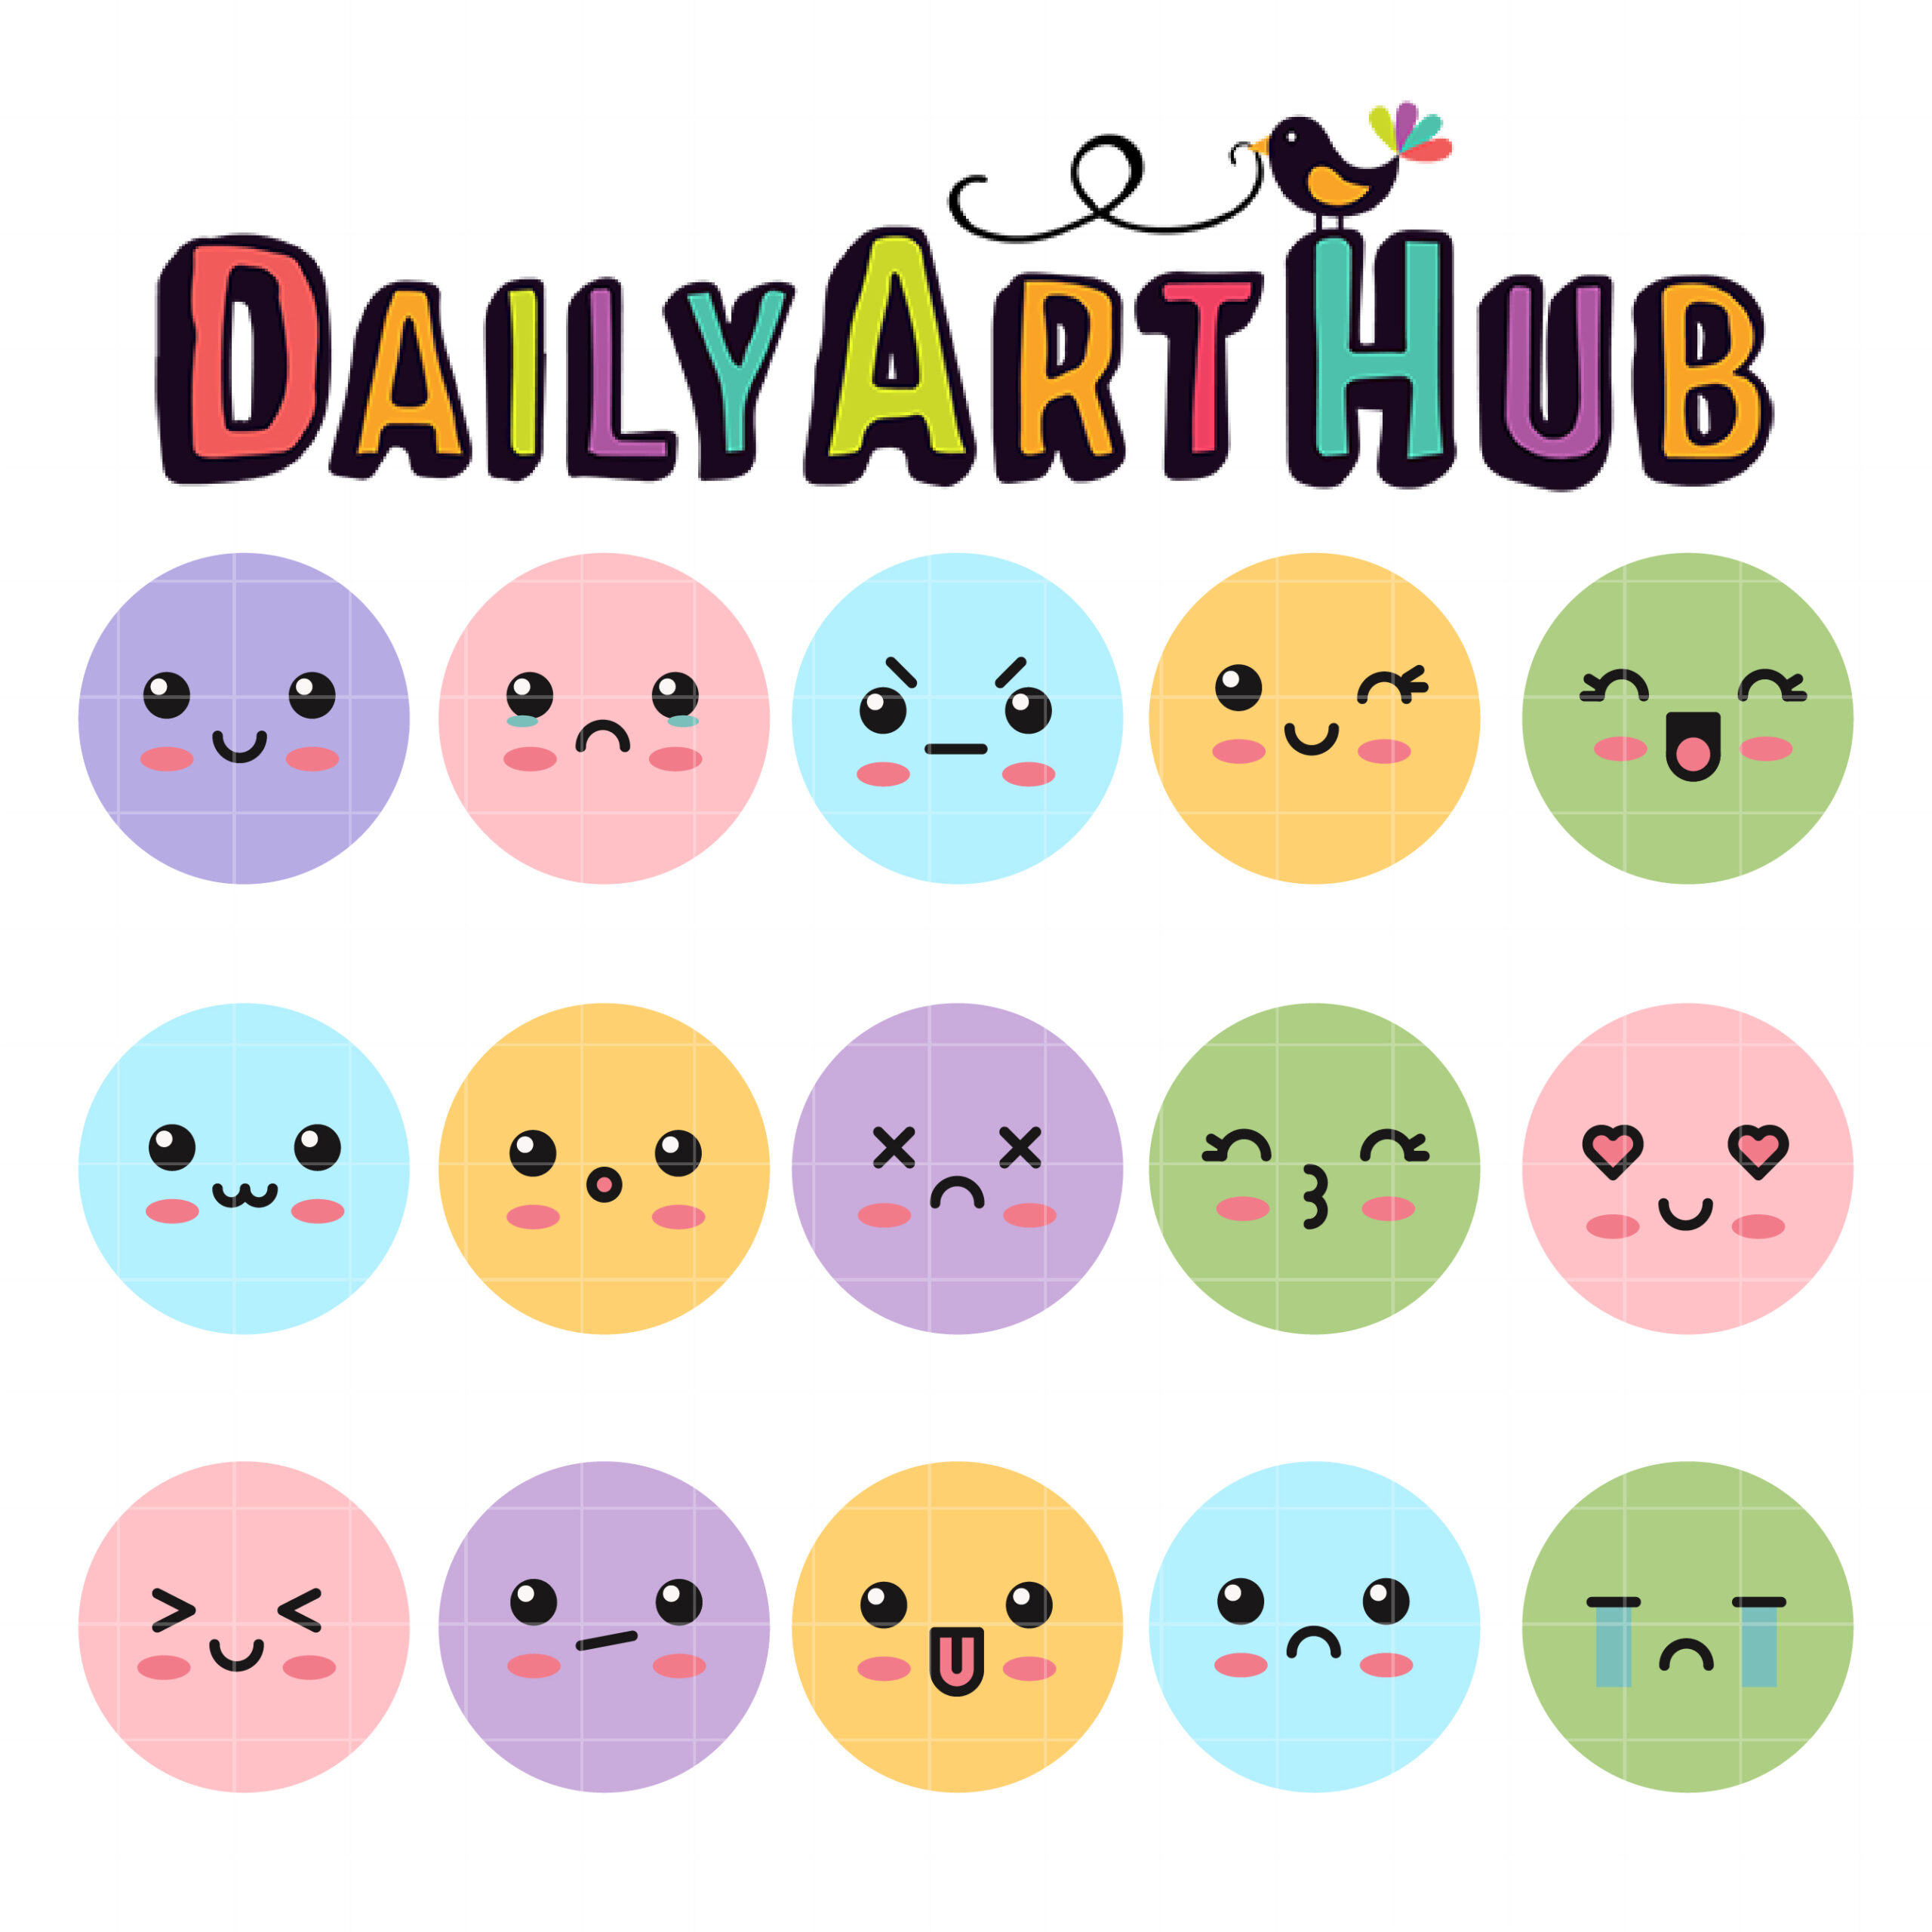 https://www.dailyarthub.com/wp-content/uploads/2023/01/Cute-Emoticon-Face-Ball-scaled.jpg